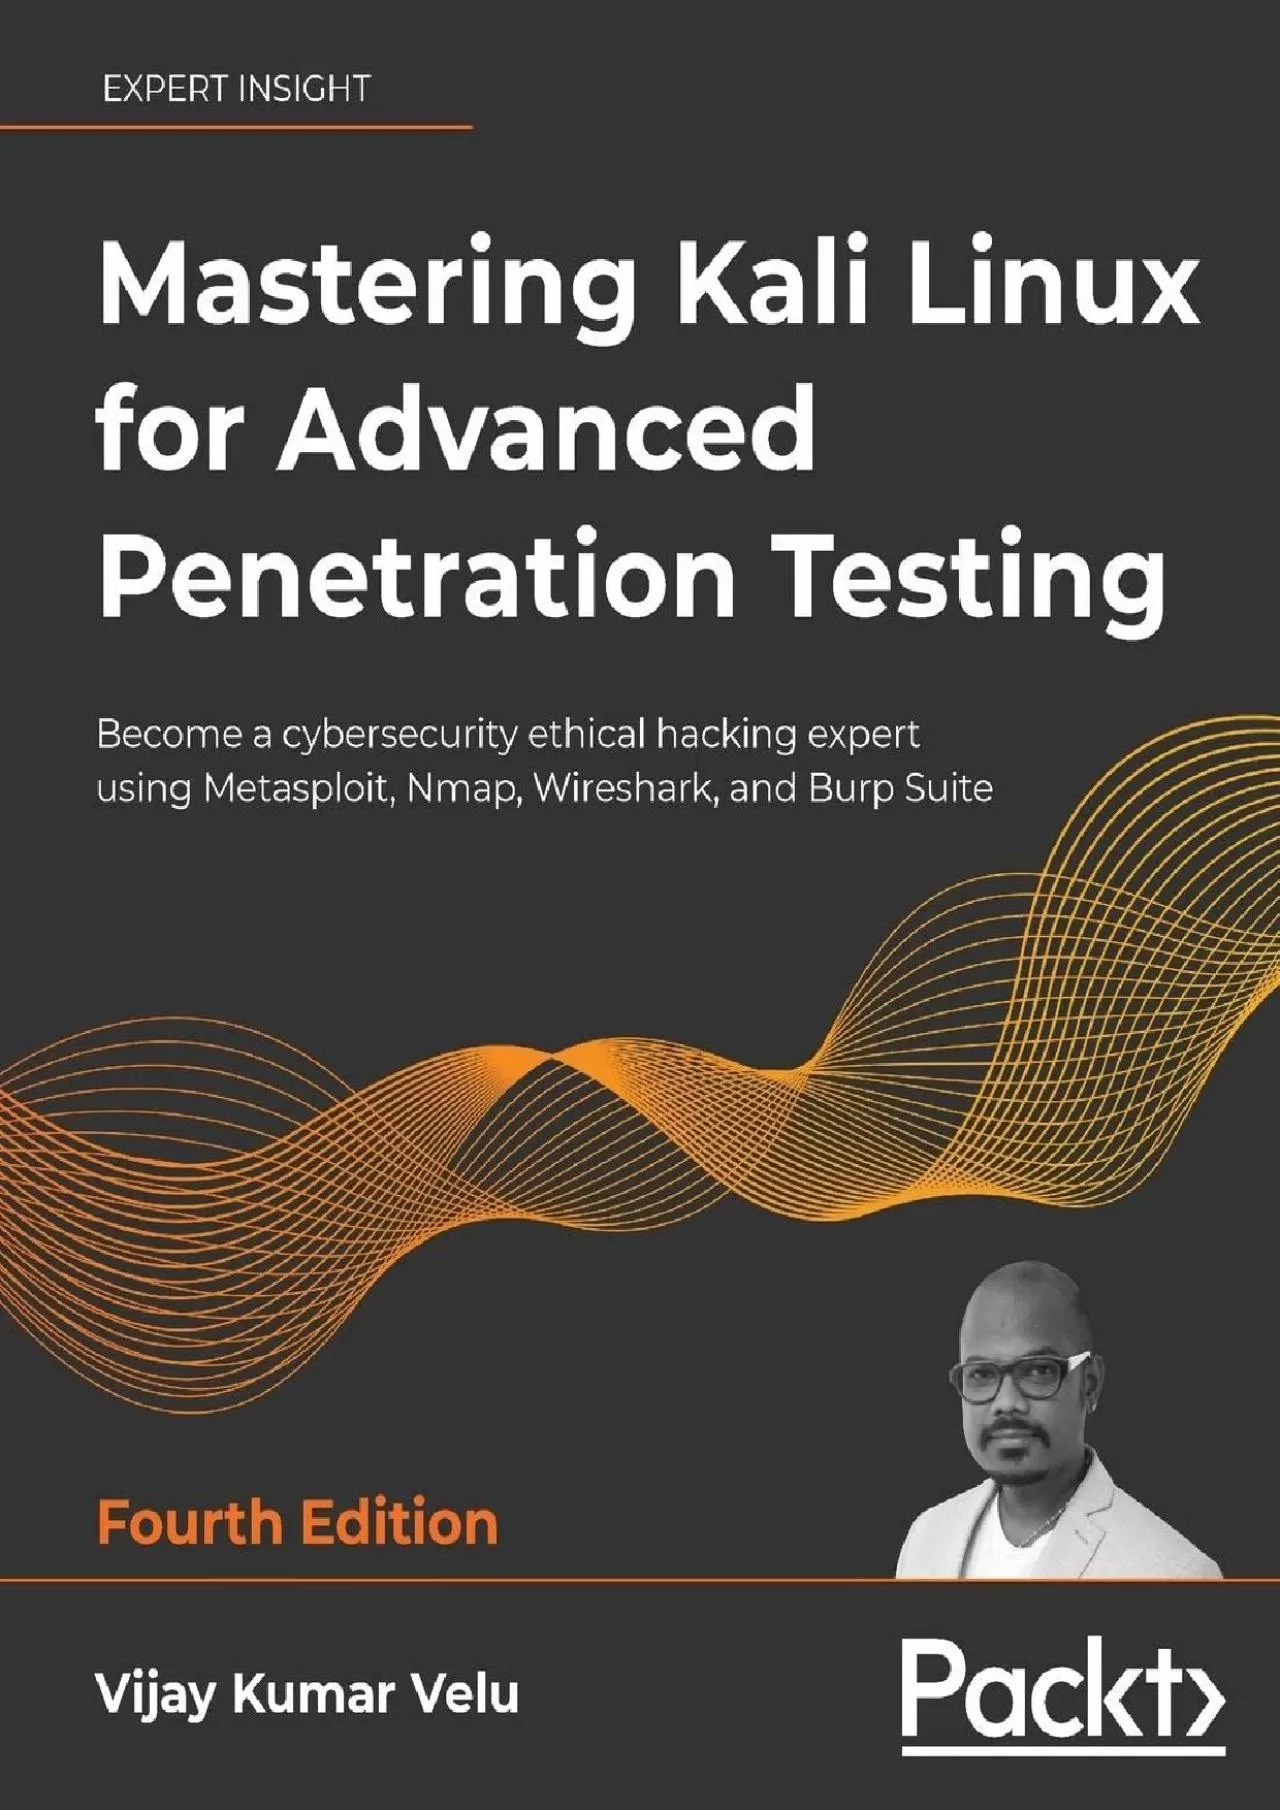 (BOOK)-Mastering Kali Linux for Advanced Penetration Testing: Become a cybersecurity ethical